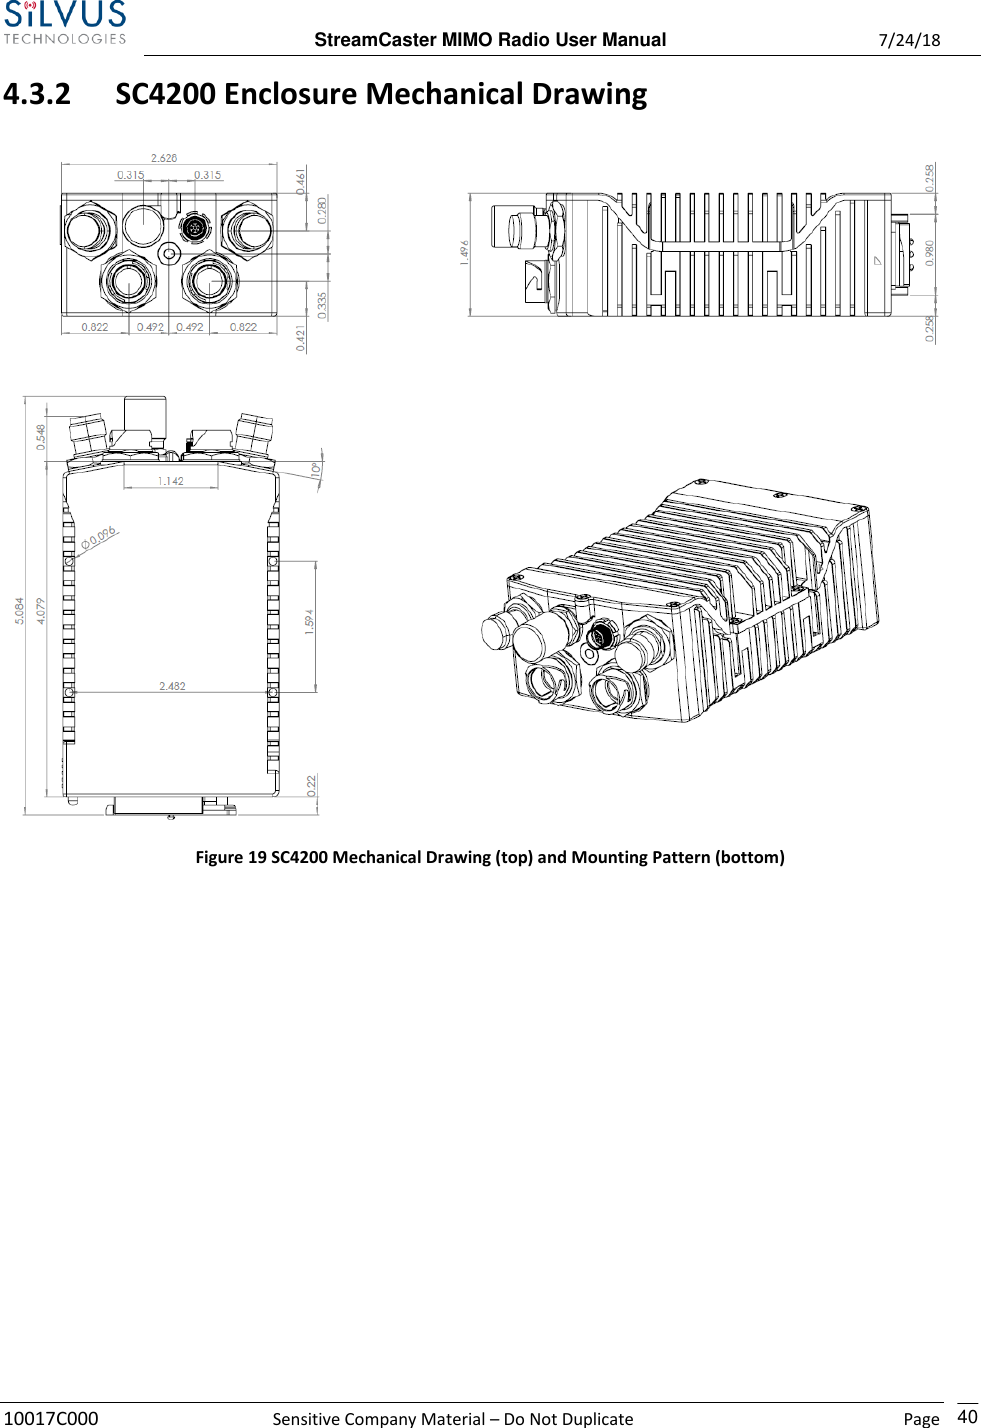  StreamCaster MIMO Radio User Manual  7/24/18 10017C000  Sensitive Company Material – Do Not Duplicate    Page    40 4.3.2 SC4200 Enclosure Mechanical Drawing   Figure 19 SC4200 Mechanical Drawing (top) and Mounting Pattern (bottom)  